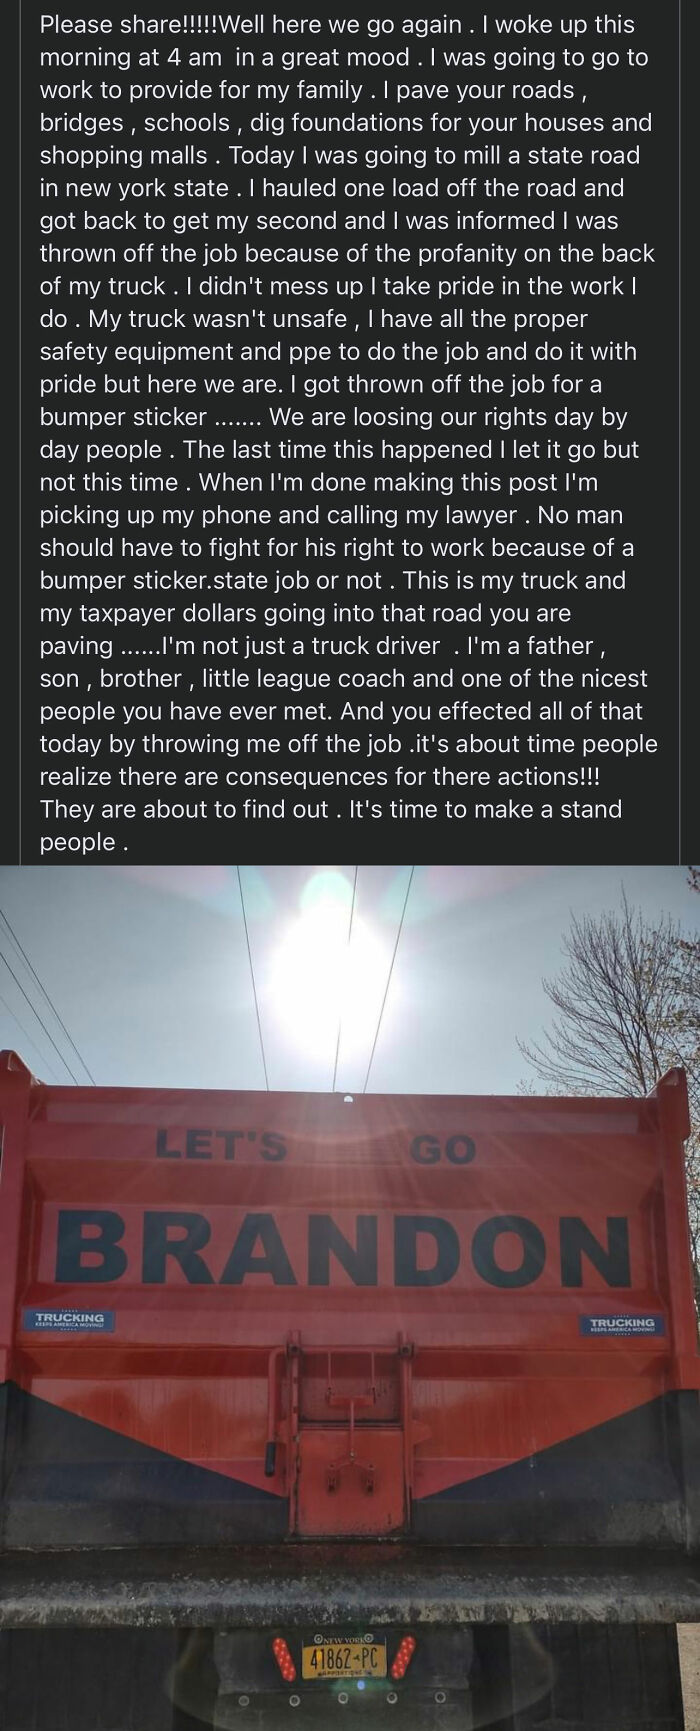 Dump Truck Driver Gets Fired From Two Separate Jobs Because Of A “Bumper Sticker”; Plans To Call A Lawyer To Get His Rights Back